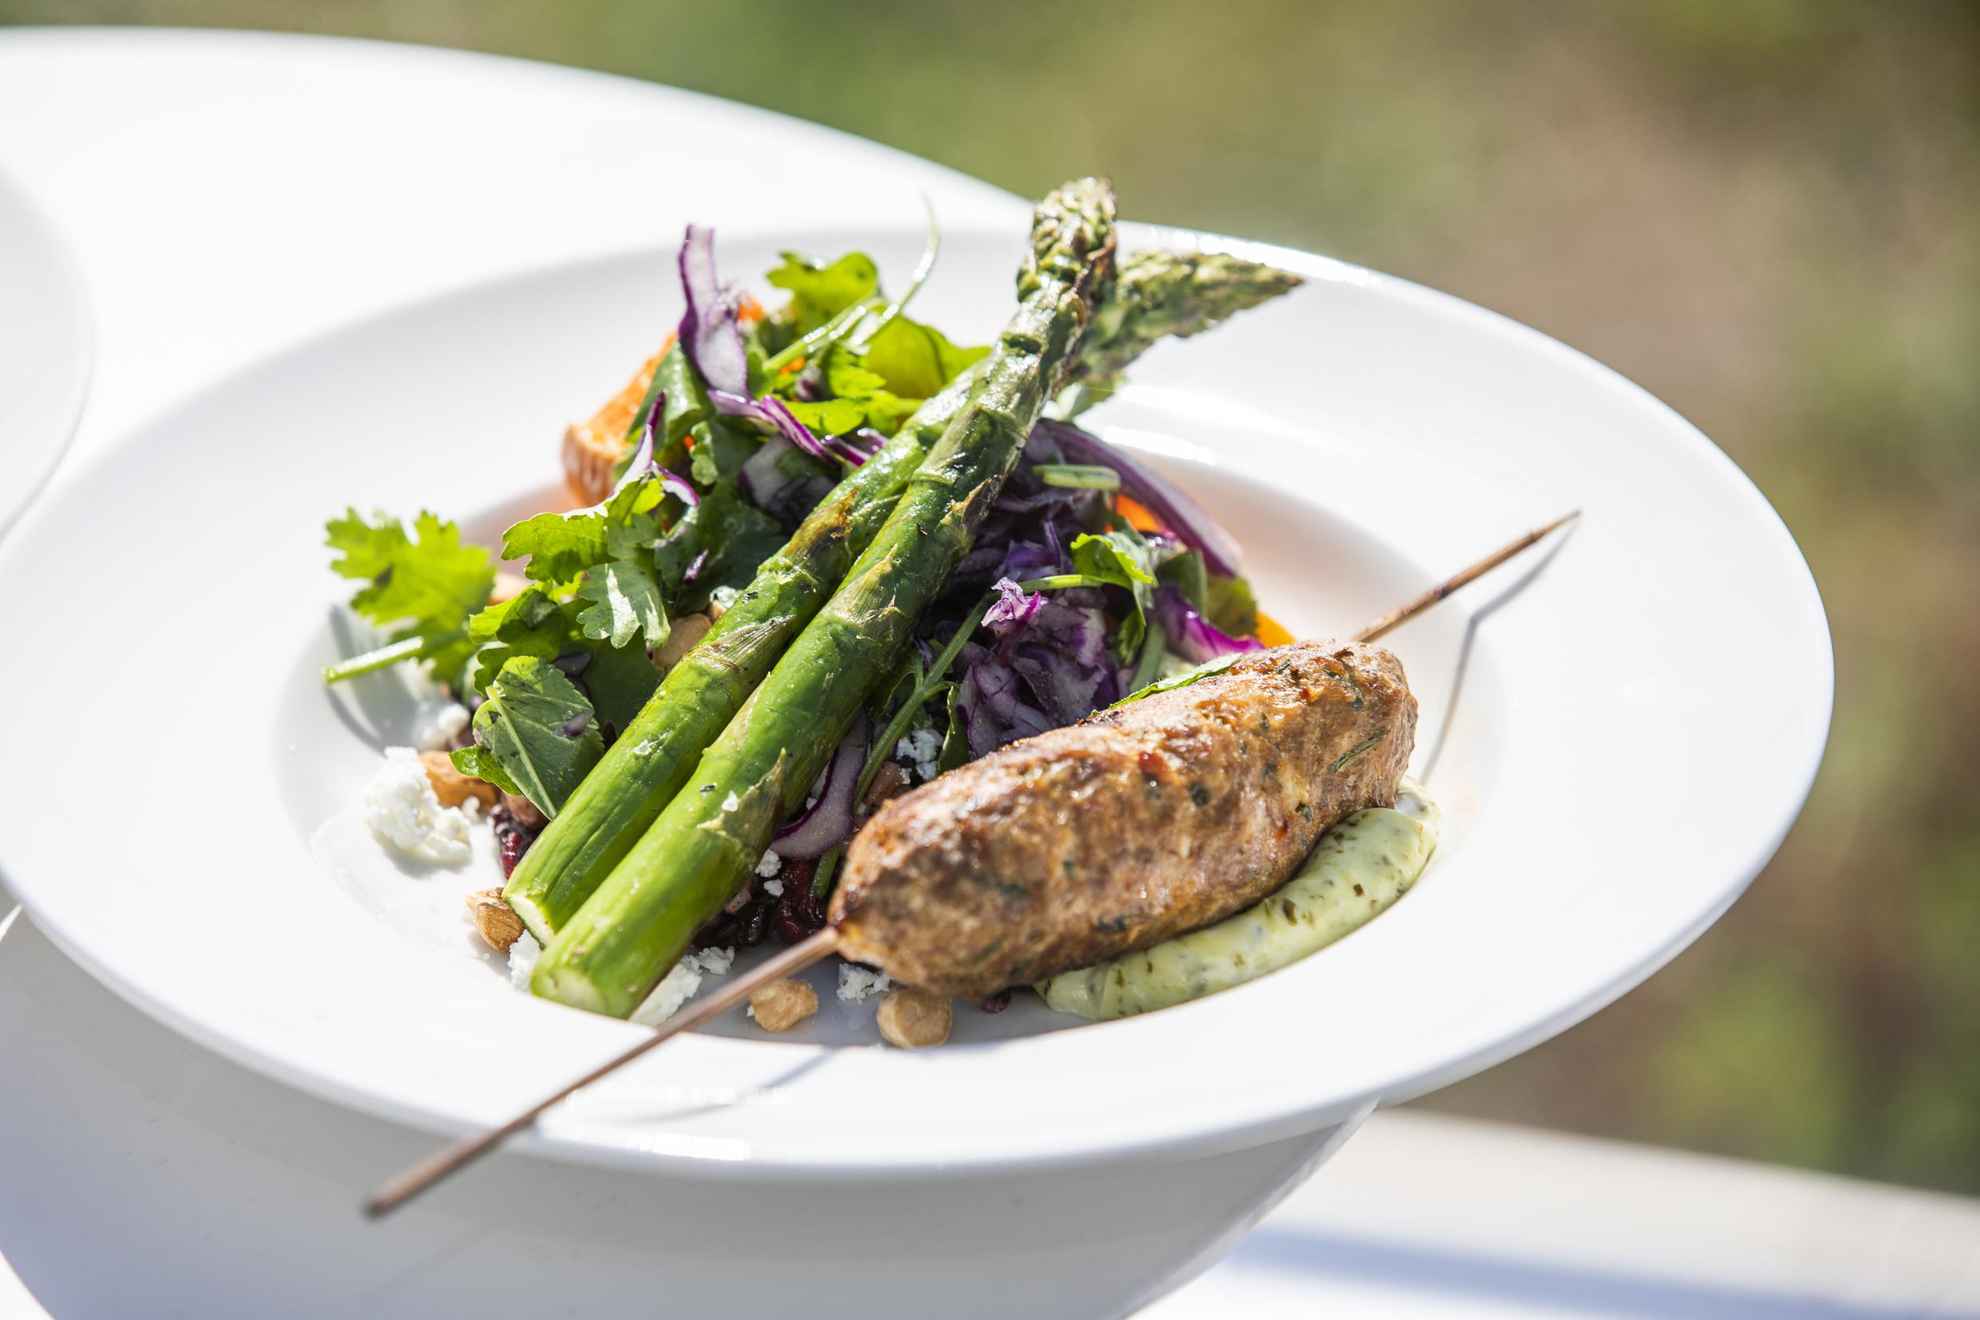 A plate with salad, aspargus and lamb skewers sourced in Sweden.